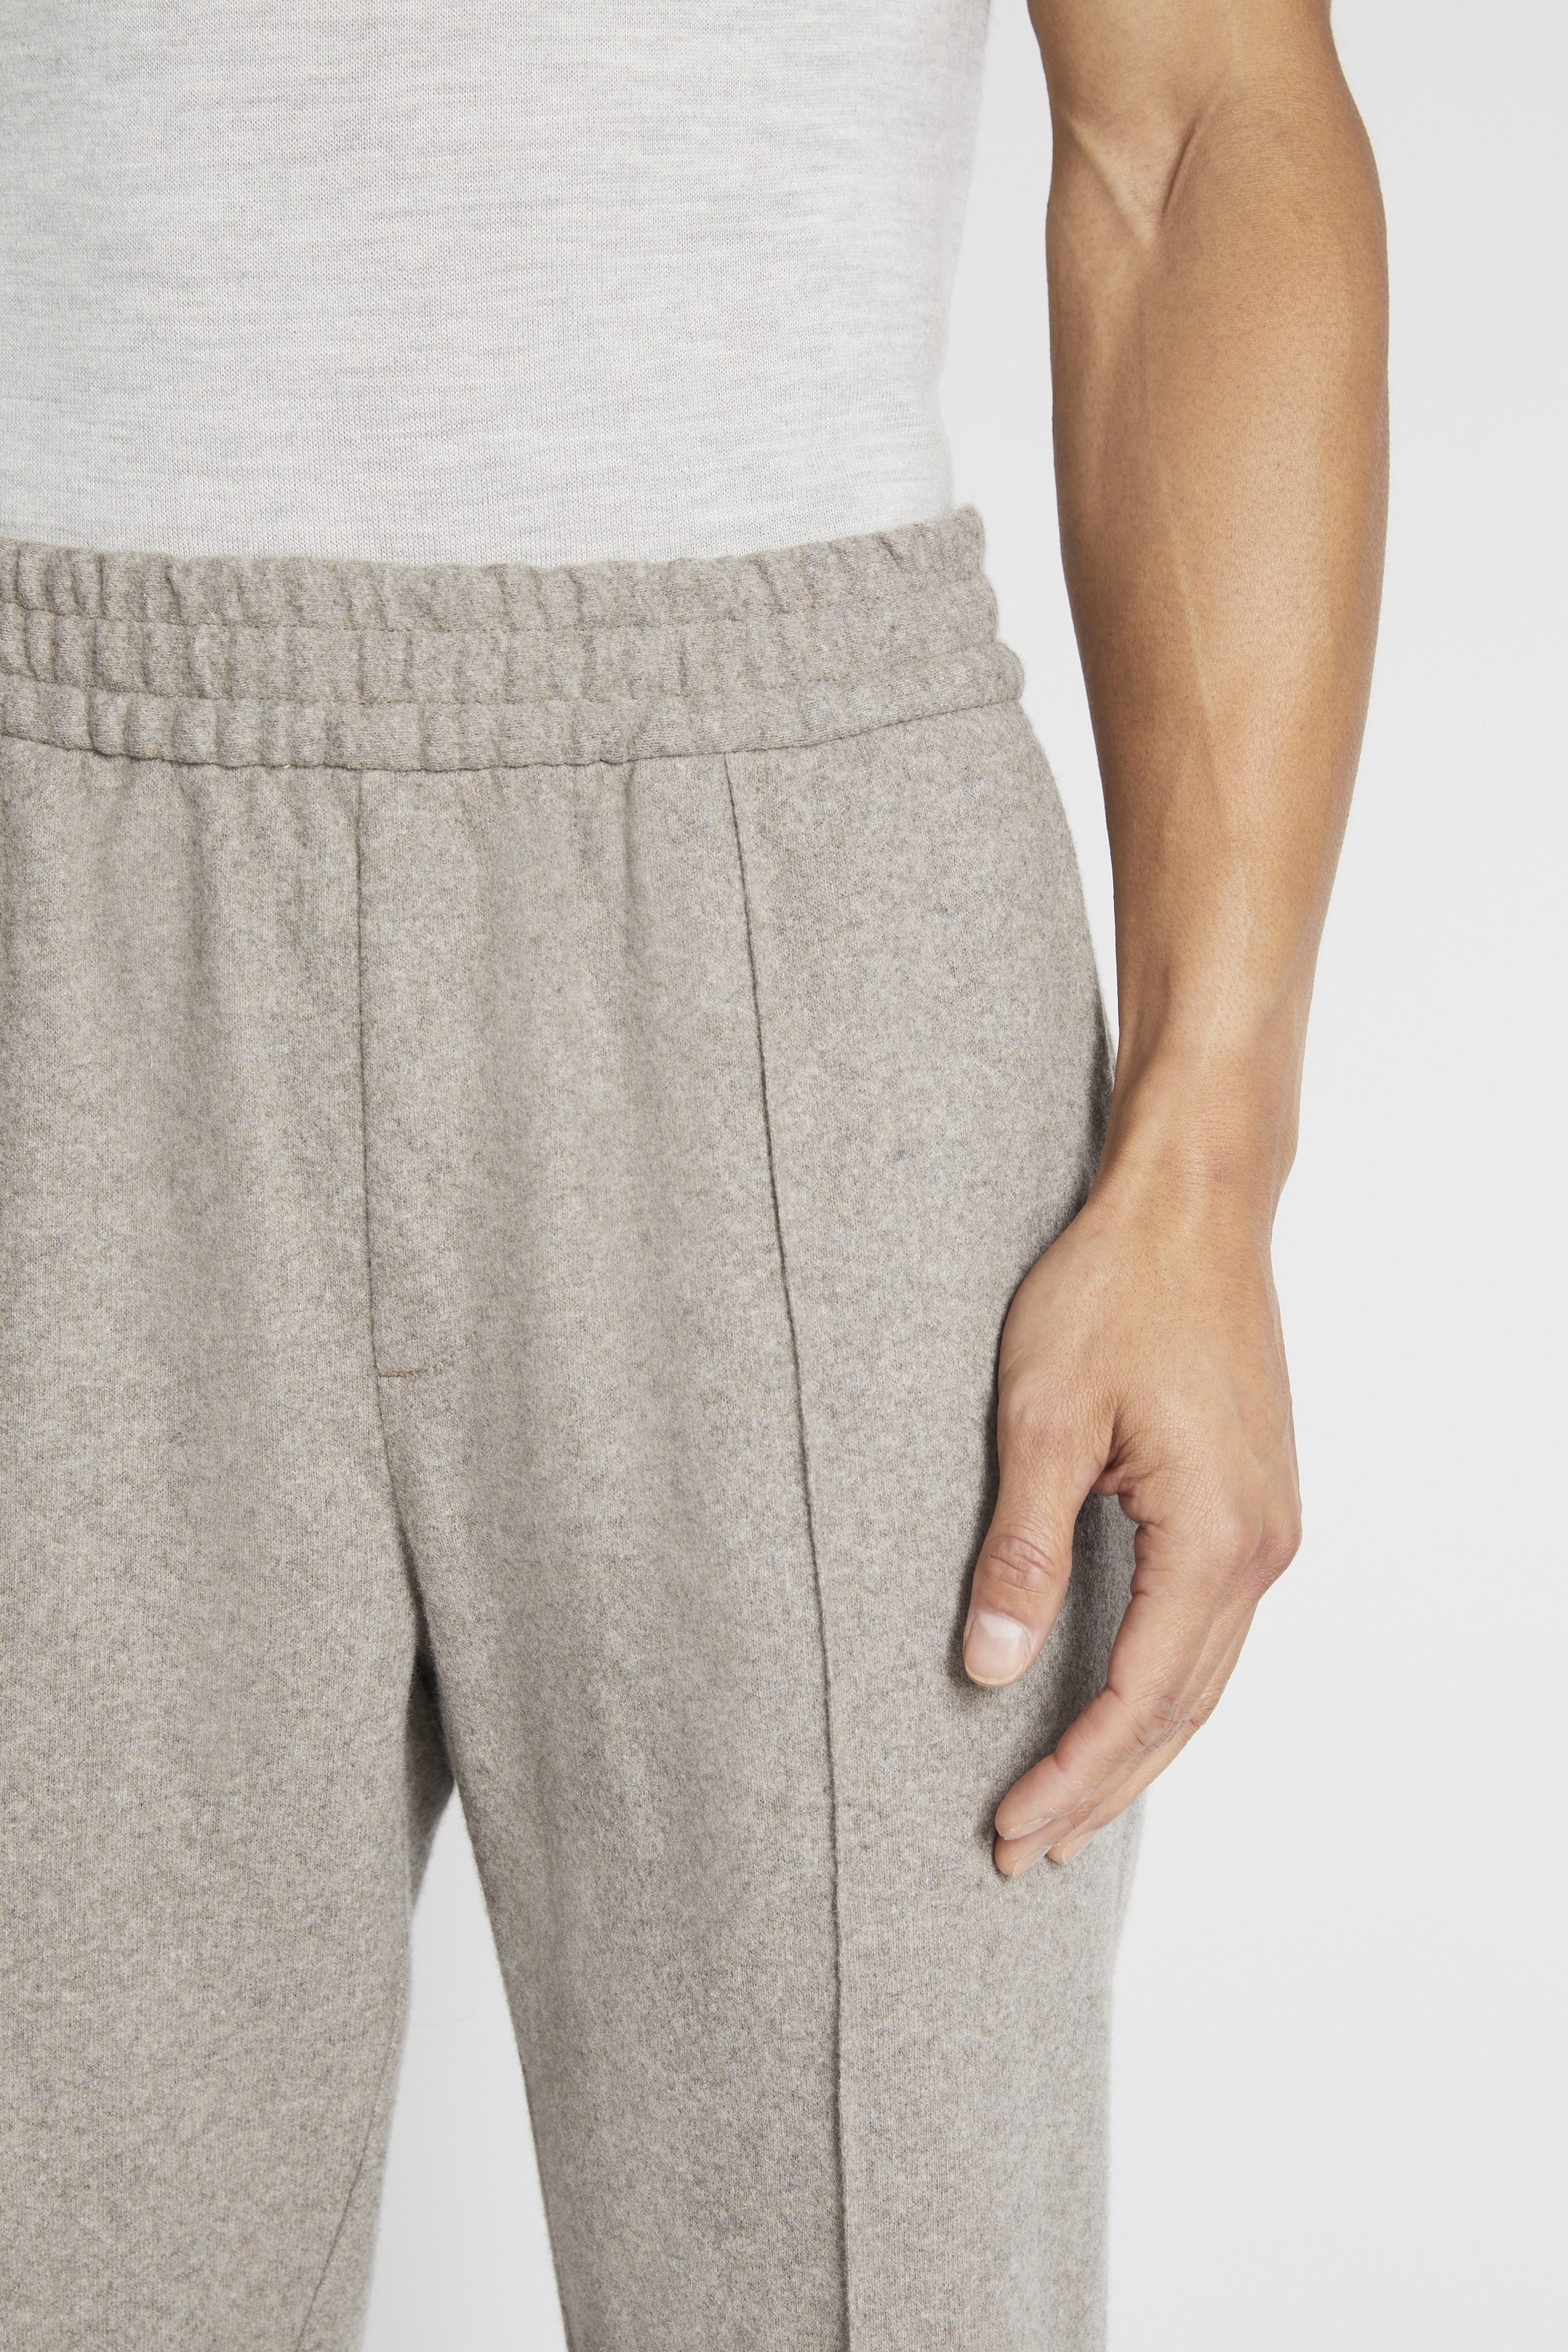 Oatmeal Joggers | Buy Online at Moss